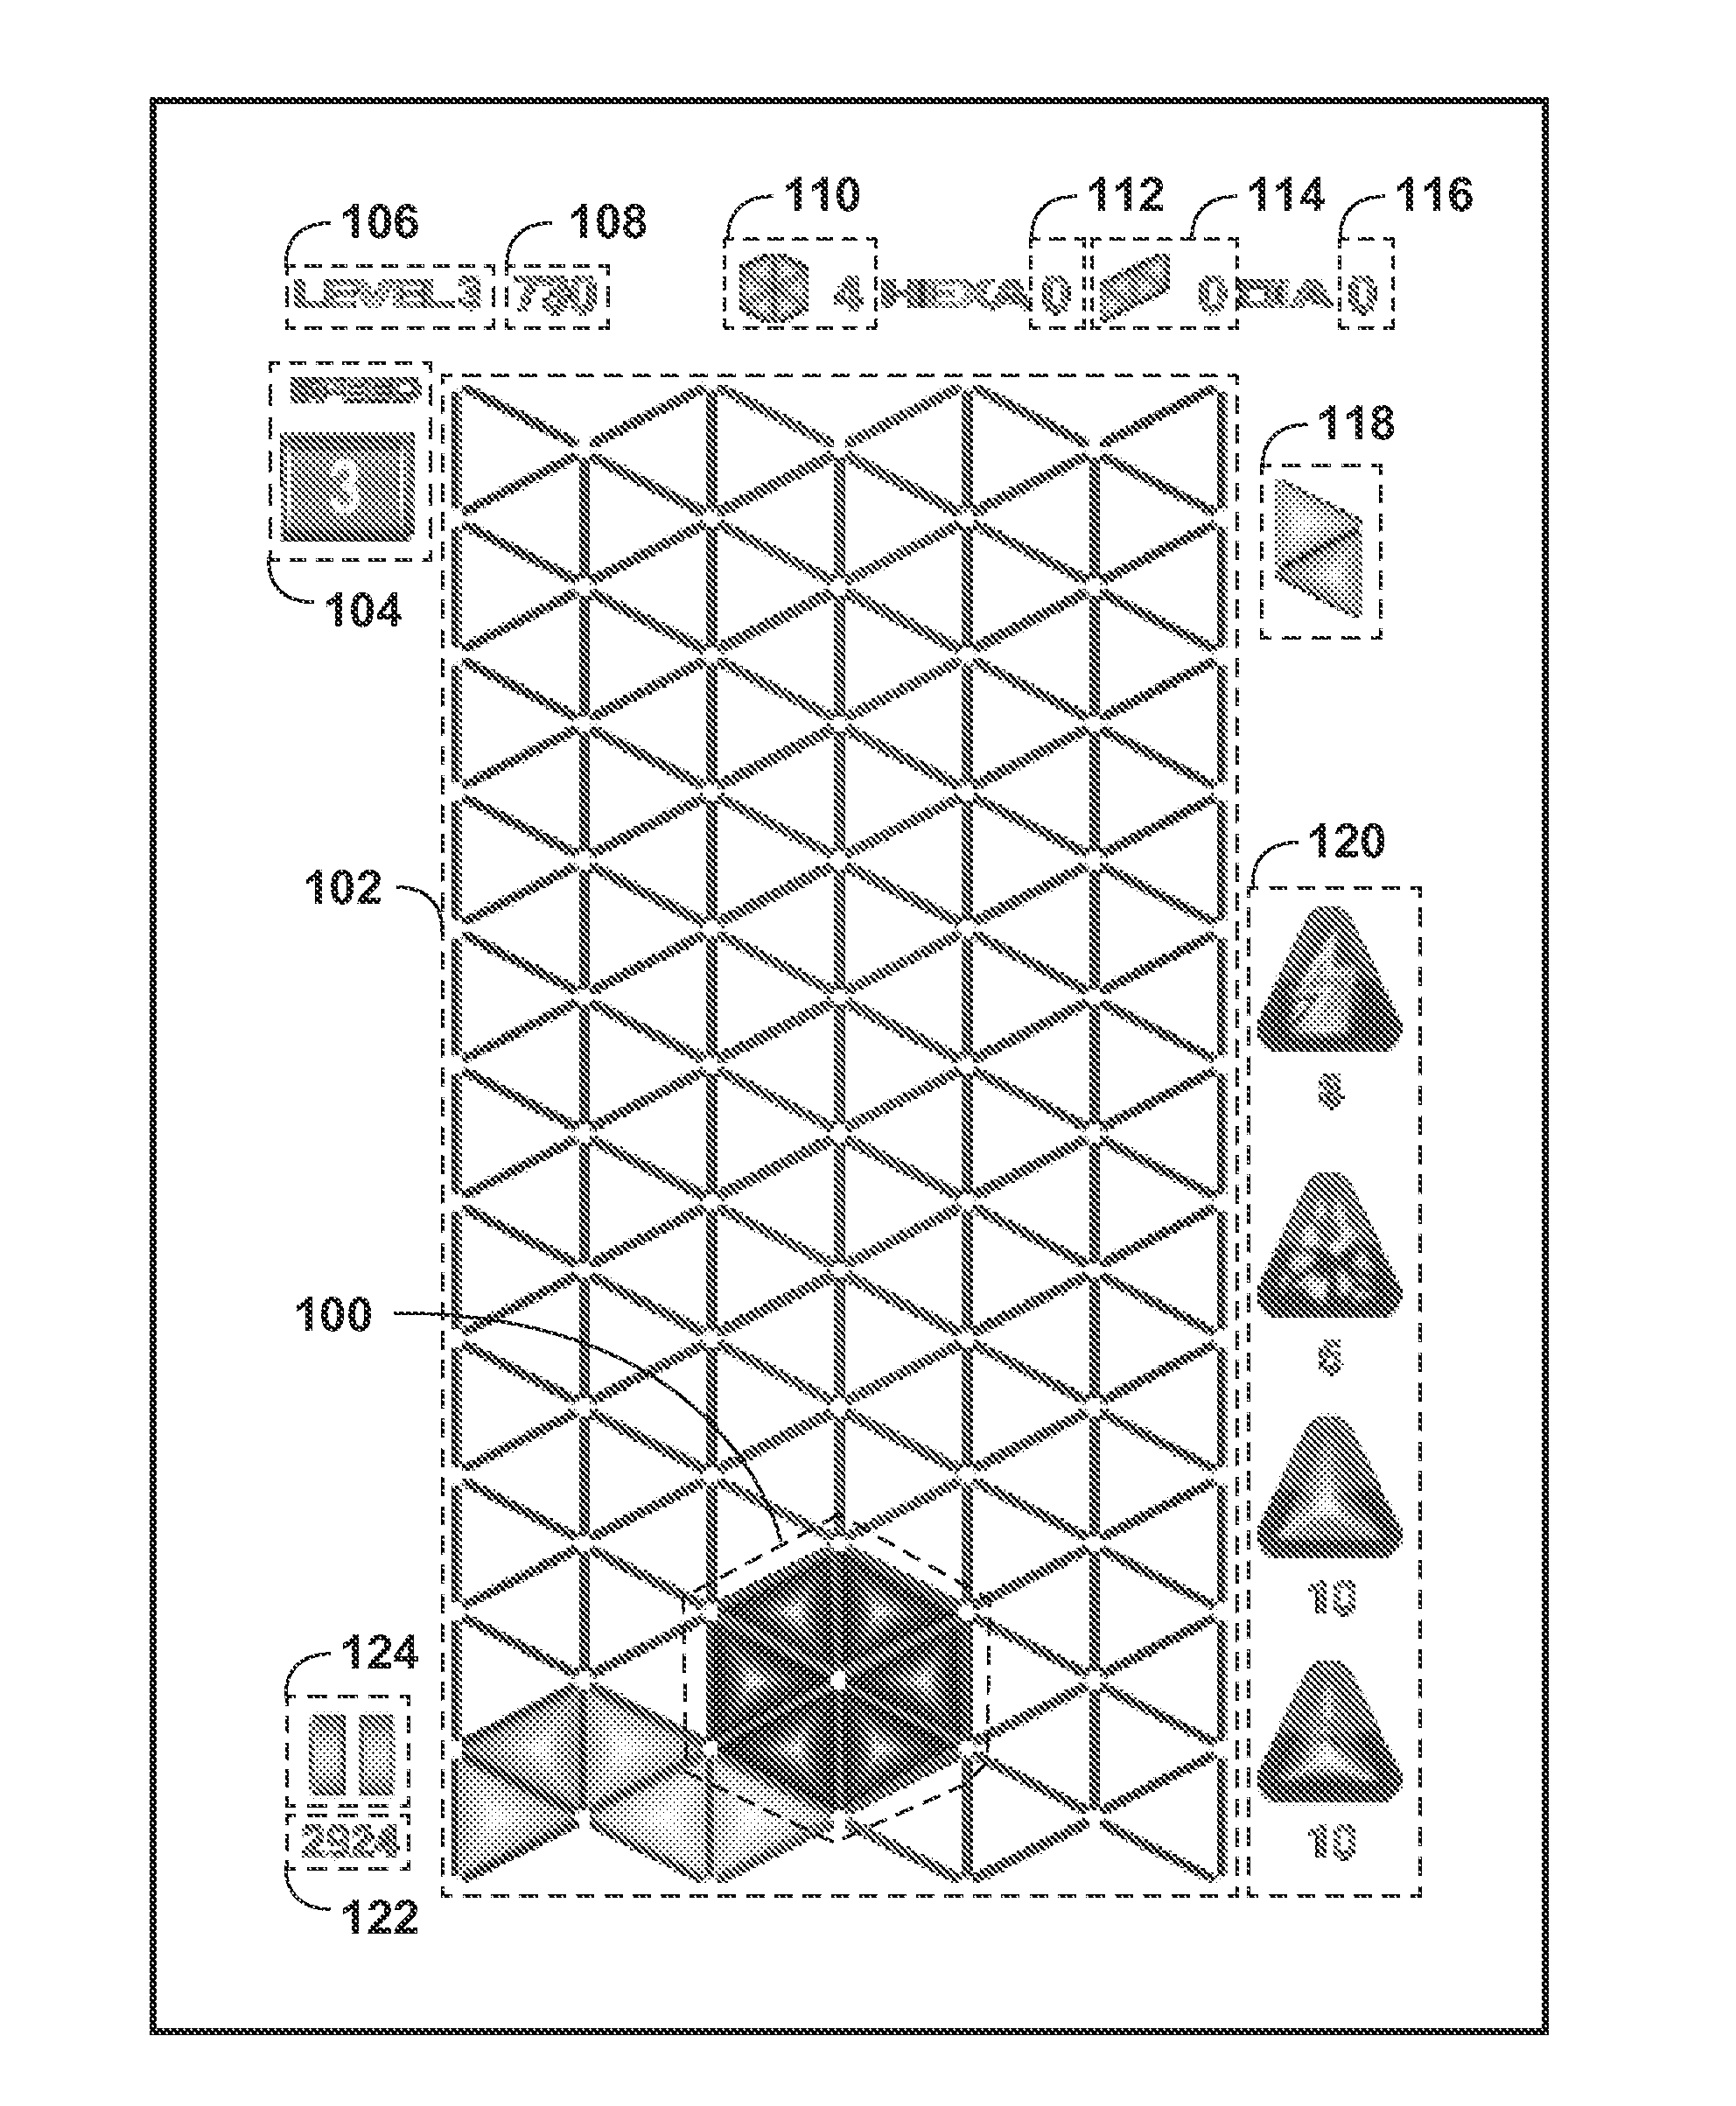 Computer game with a target number of formations created from falling pieces in a triangular grid